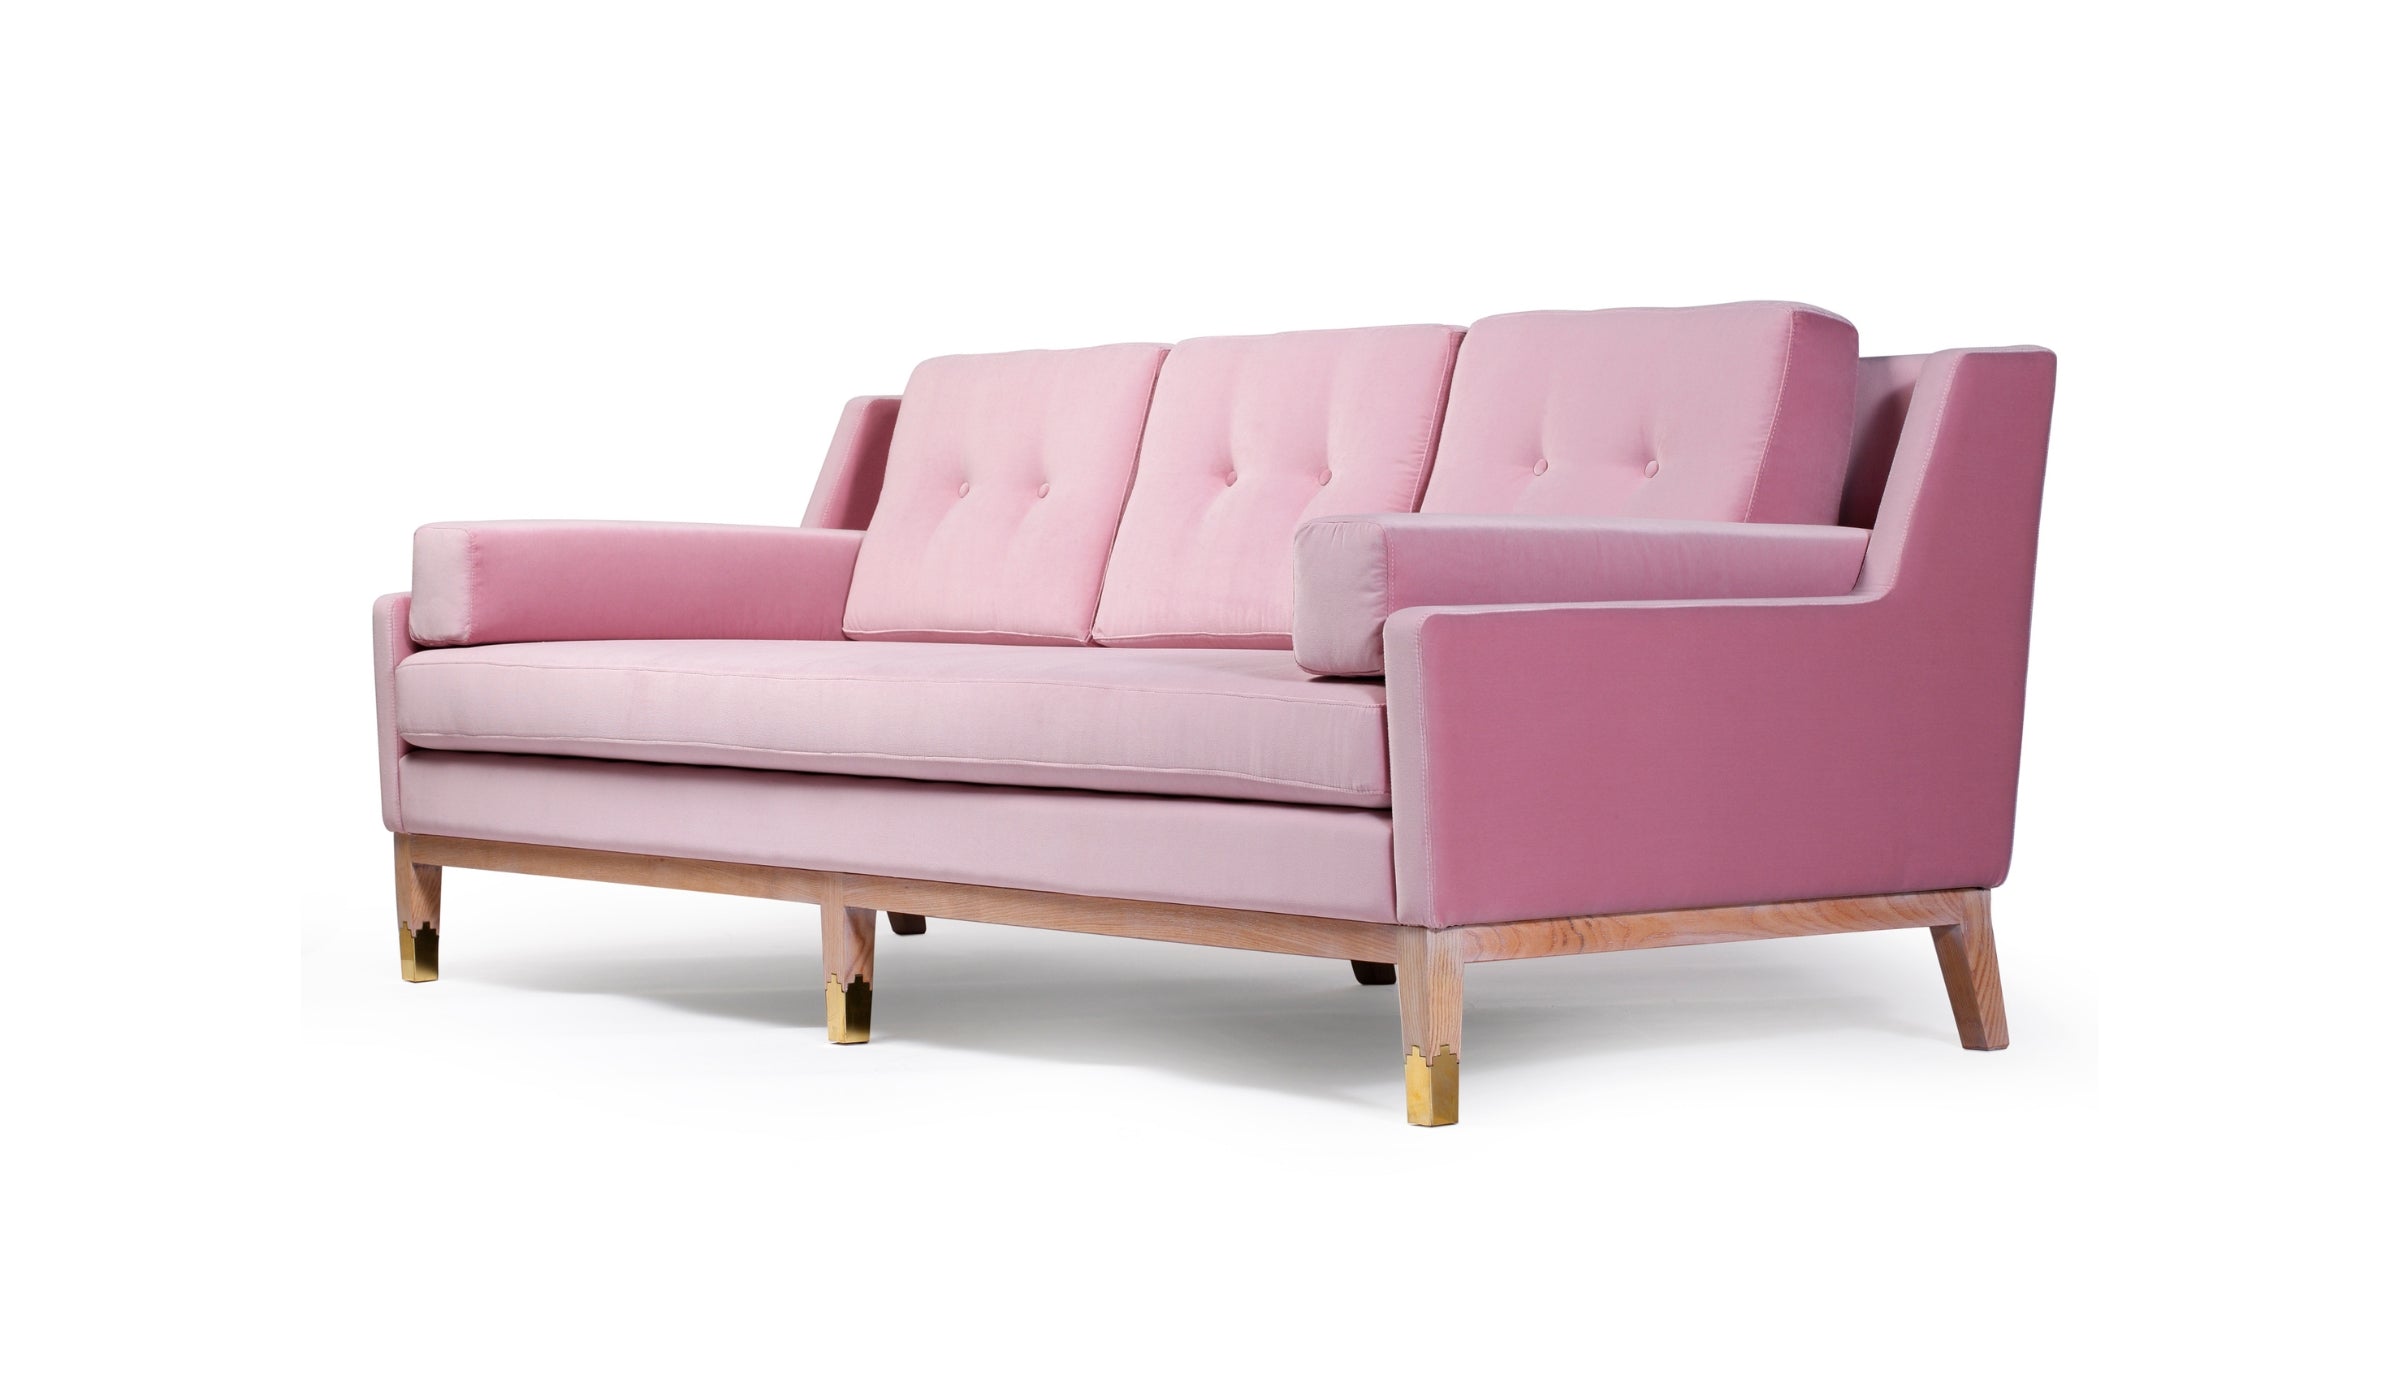 Mr. Jones - Sofa in exceptional pink fabric and limed oak